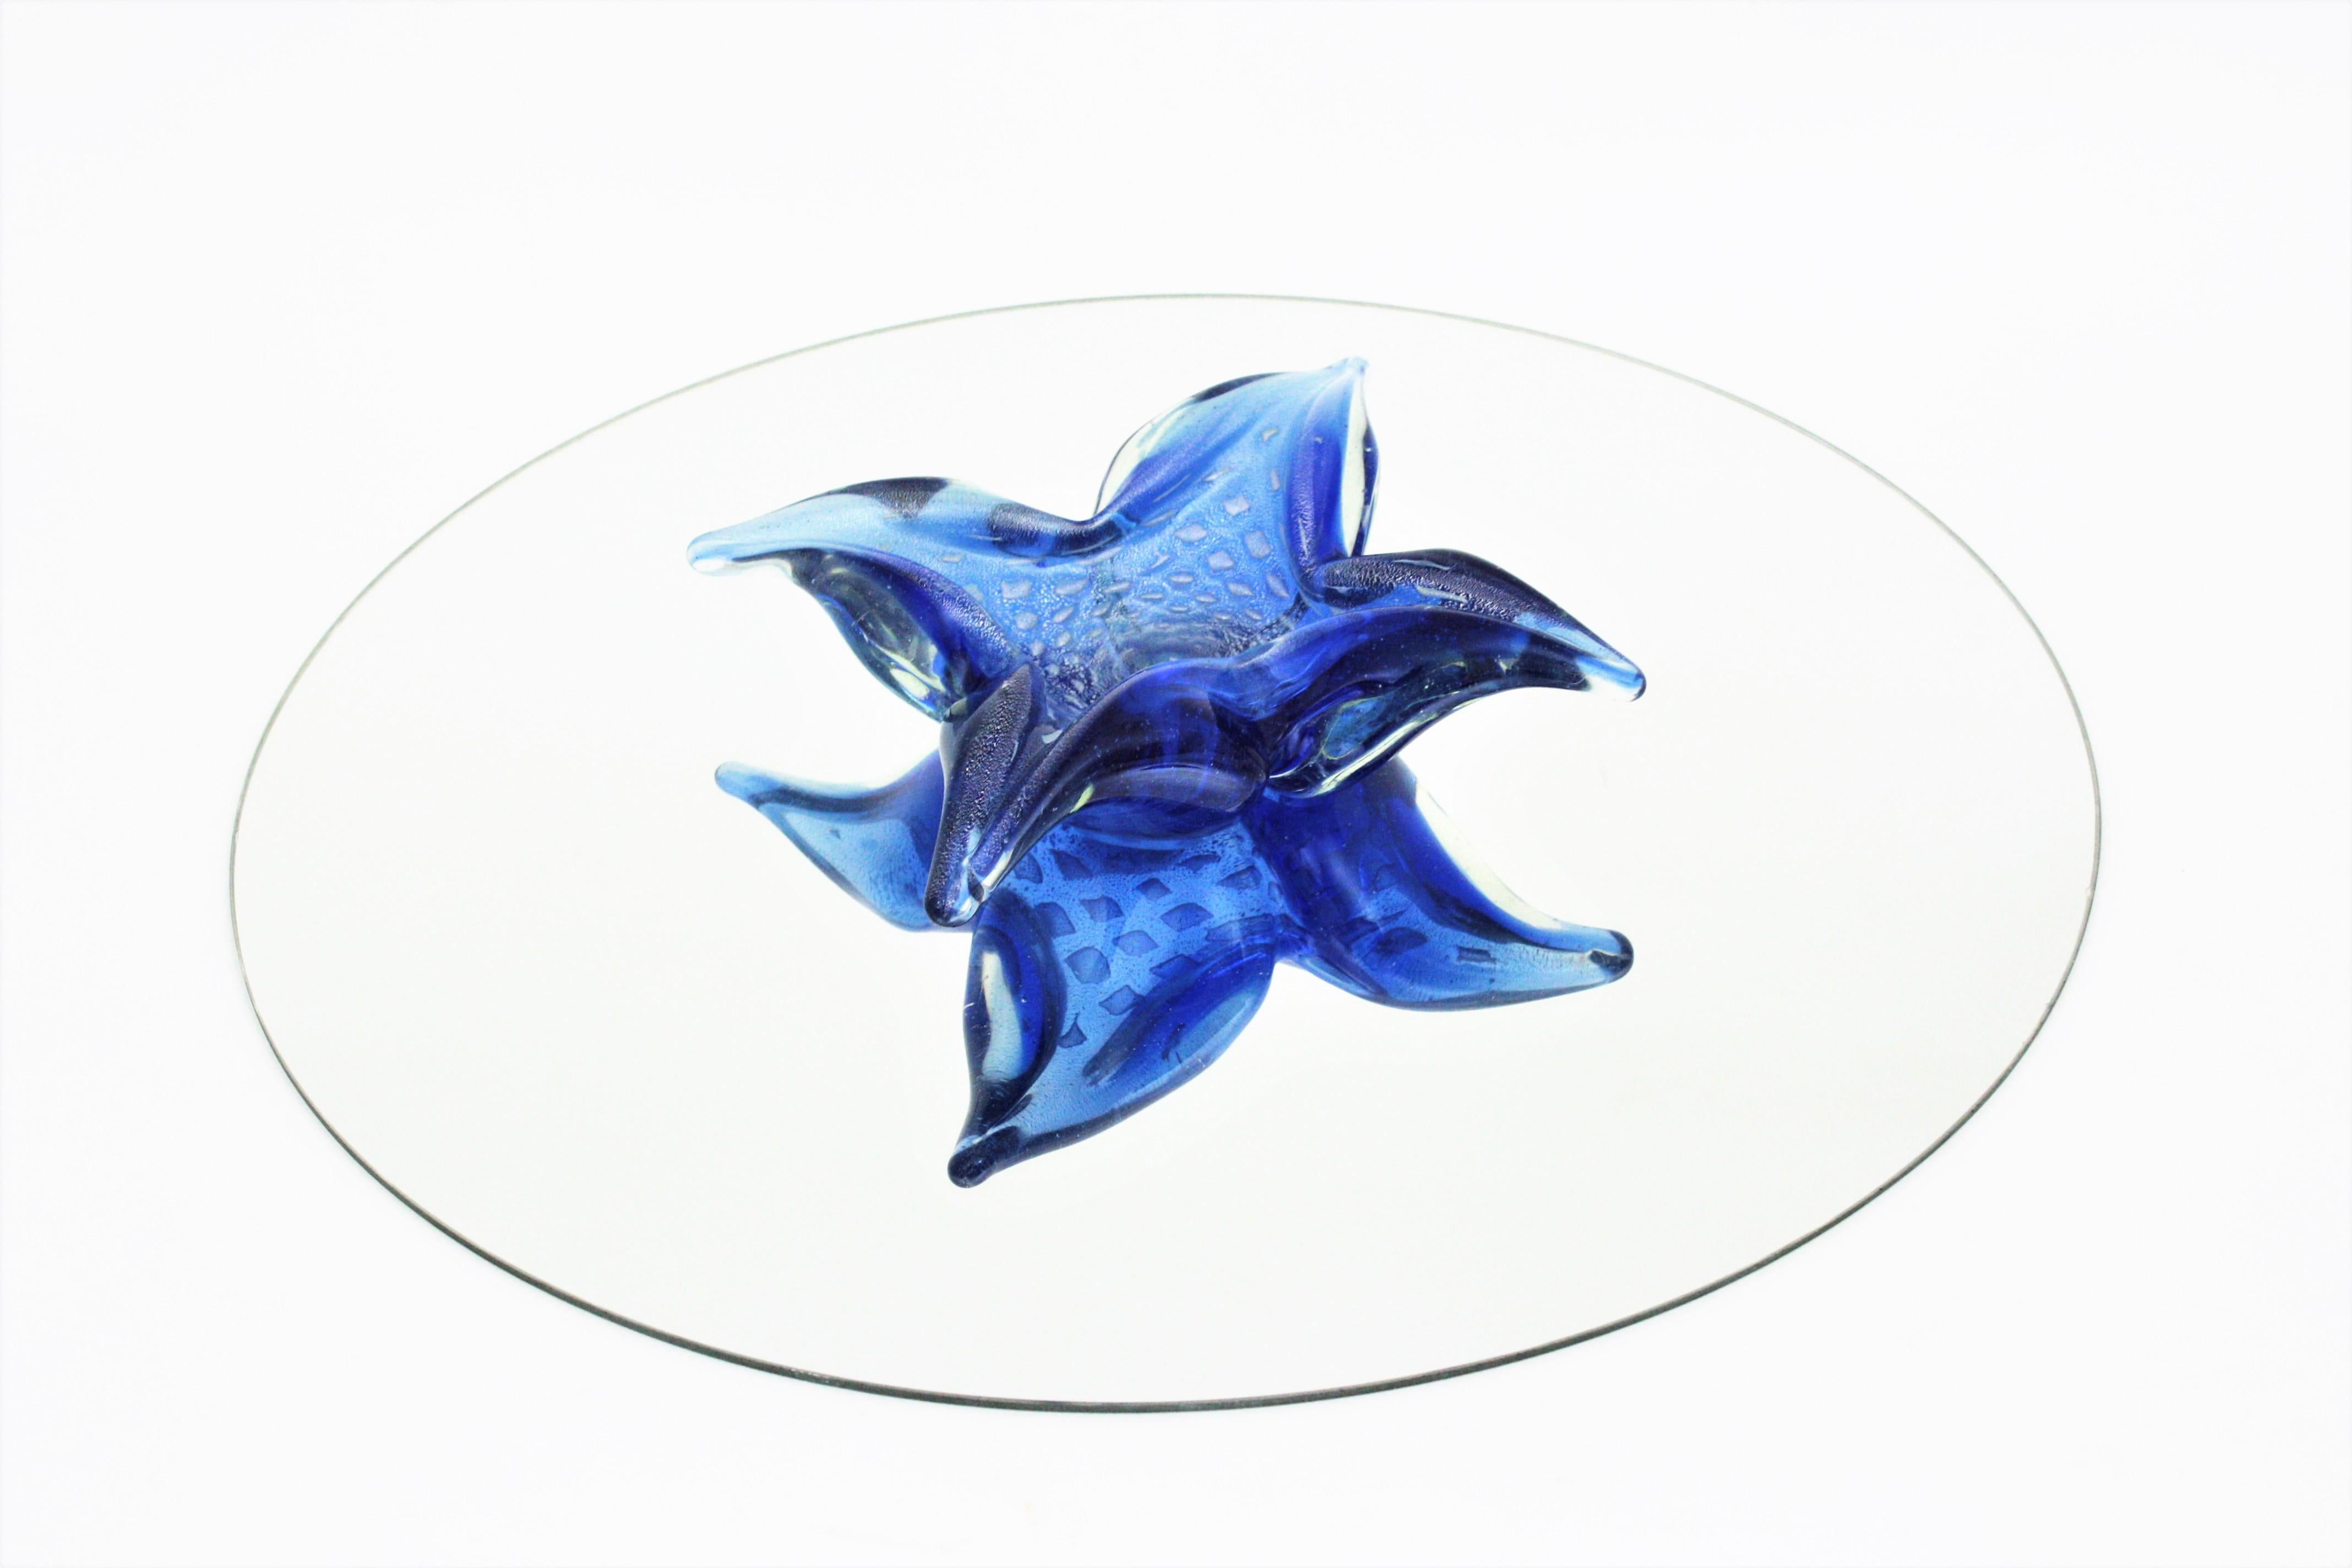 Crossshaped star / flower art glass bowl, murano glass, silver flecks. Attributed to Seguso, Italy, 1950-1960s.
Eye-catching hand blown cobalt blue Murano glass Sommerso bowl with controlled bubbles and aventurine technique with silver